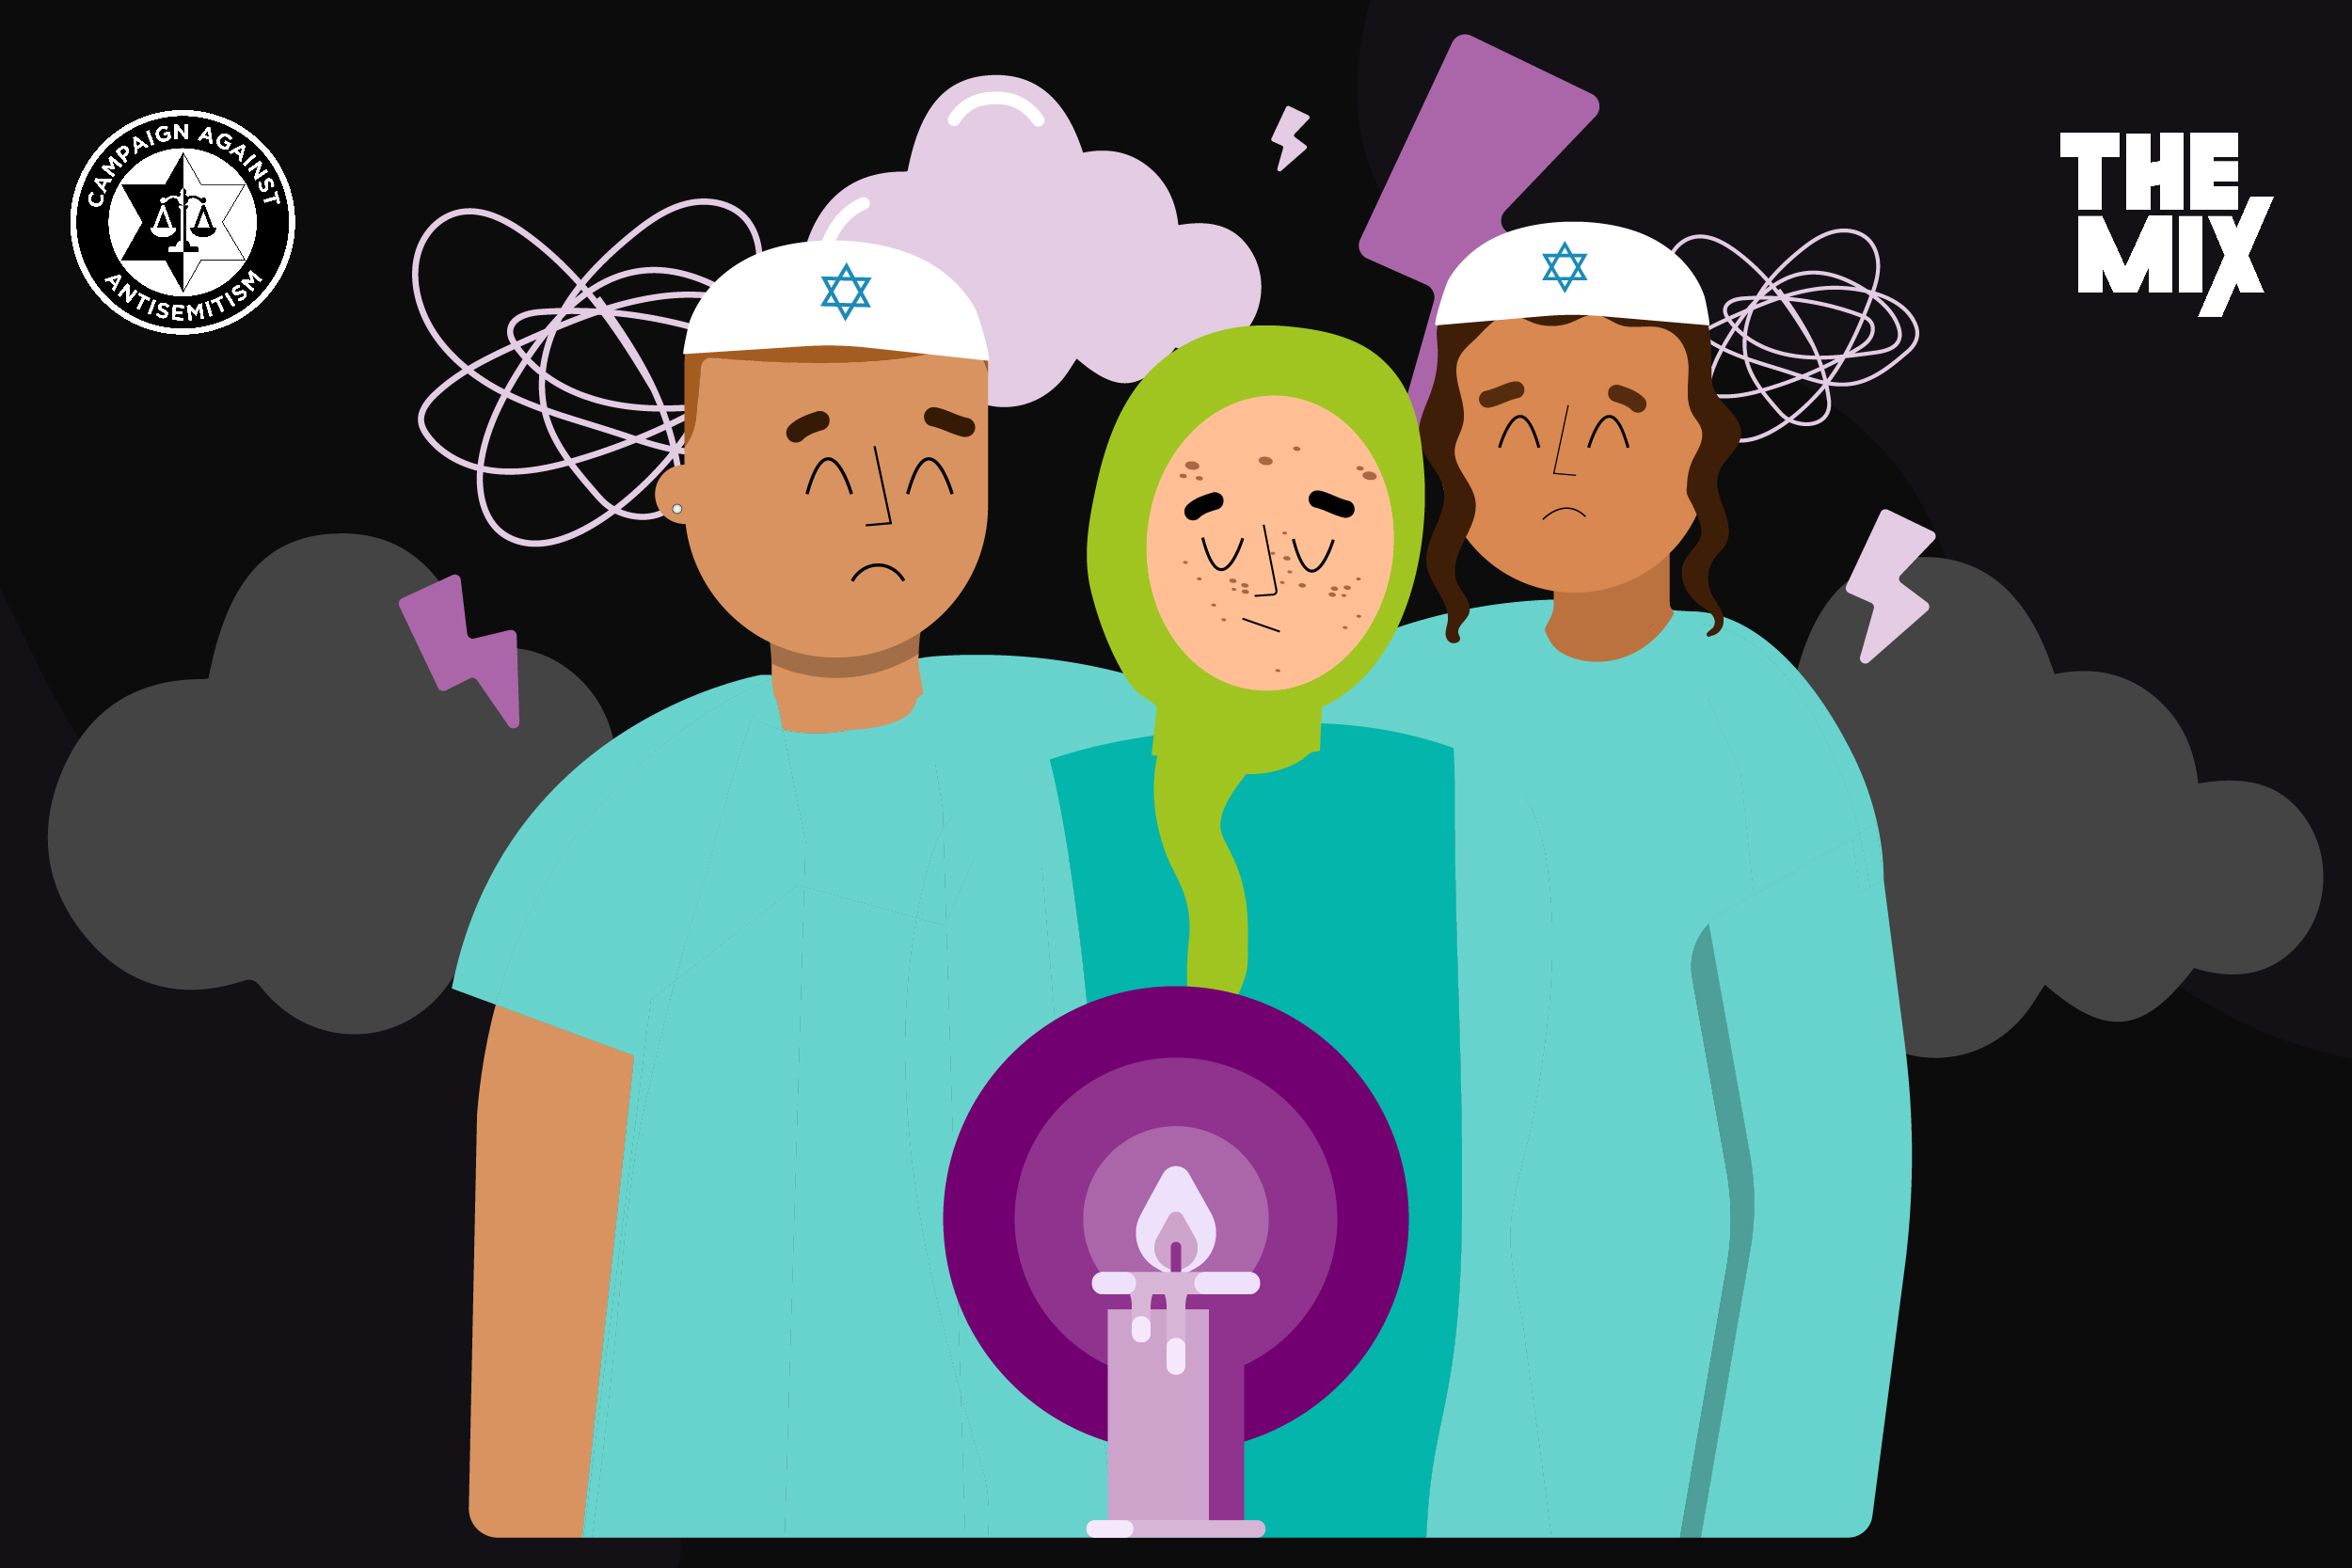 Graphic shows three young jewish people standing side by side in front of a candle representing their religion. The dark sky and clouds behind them symbolise antisemitism